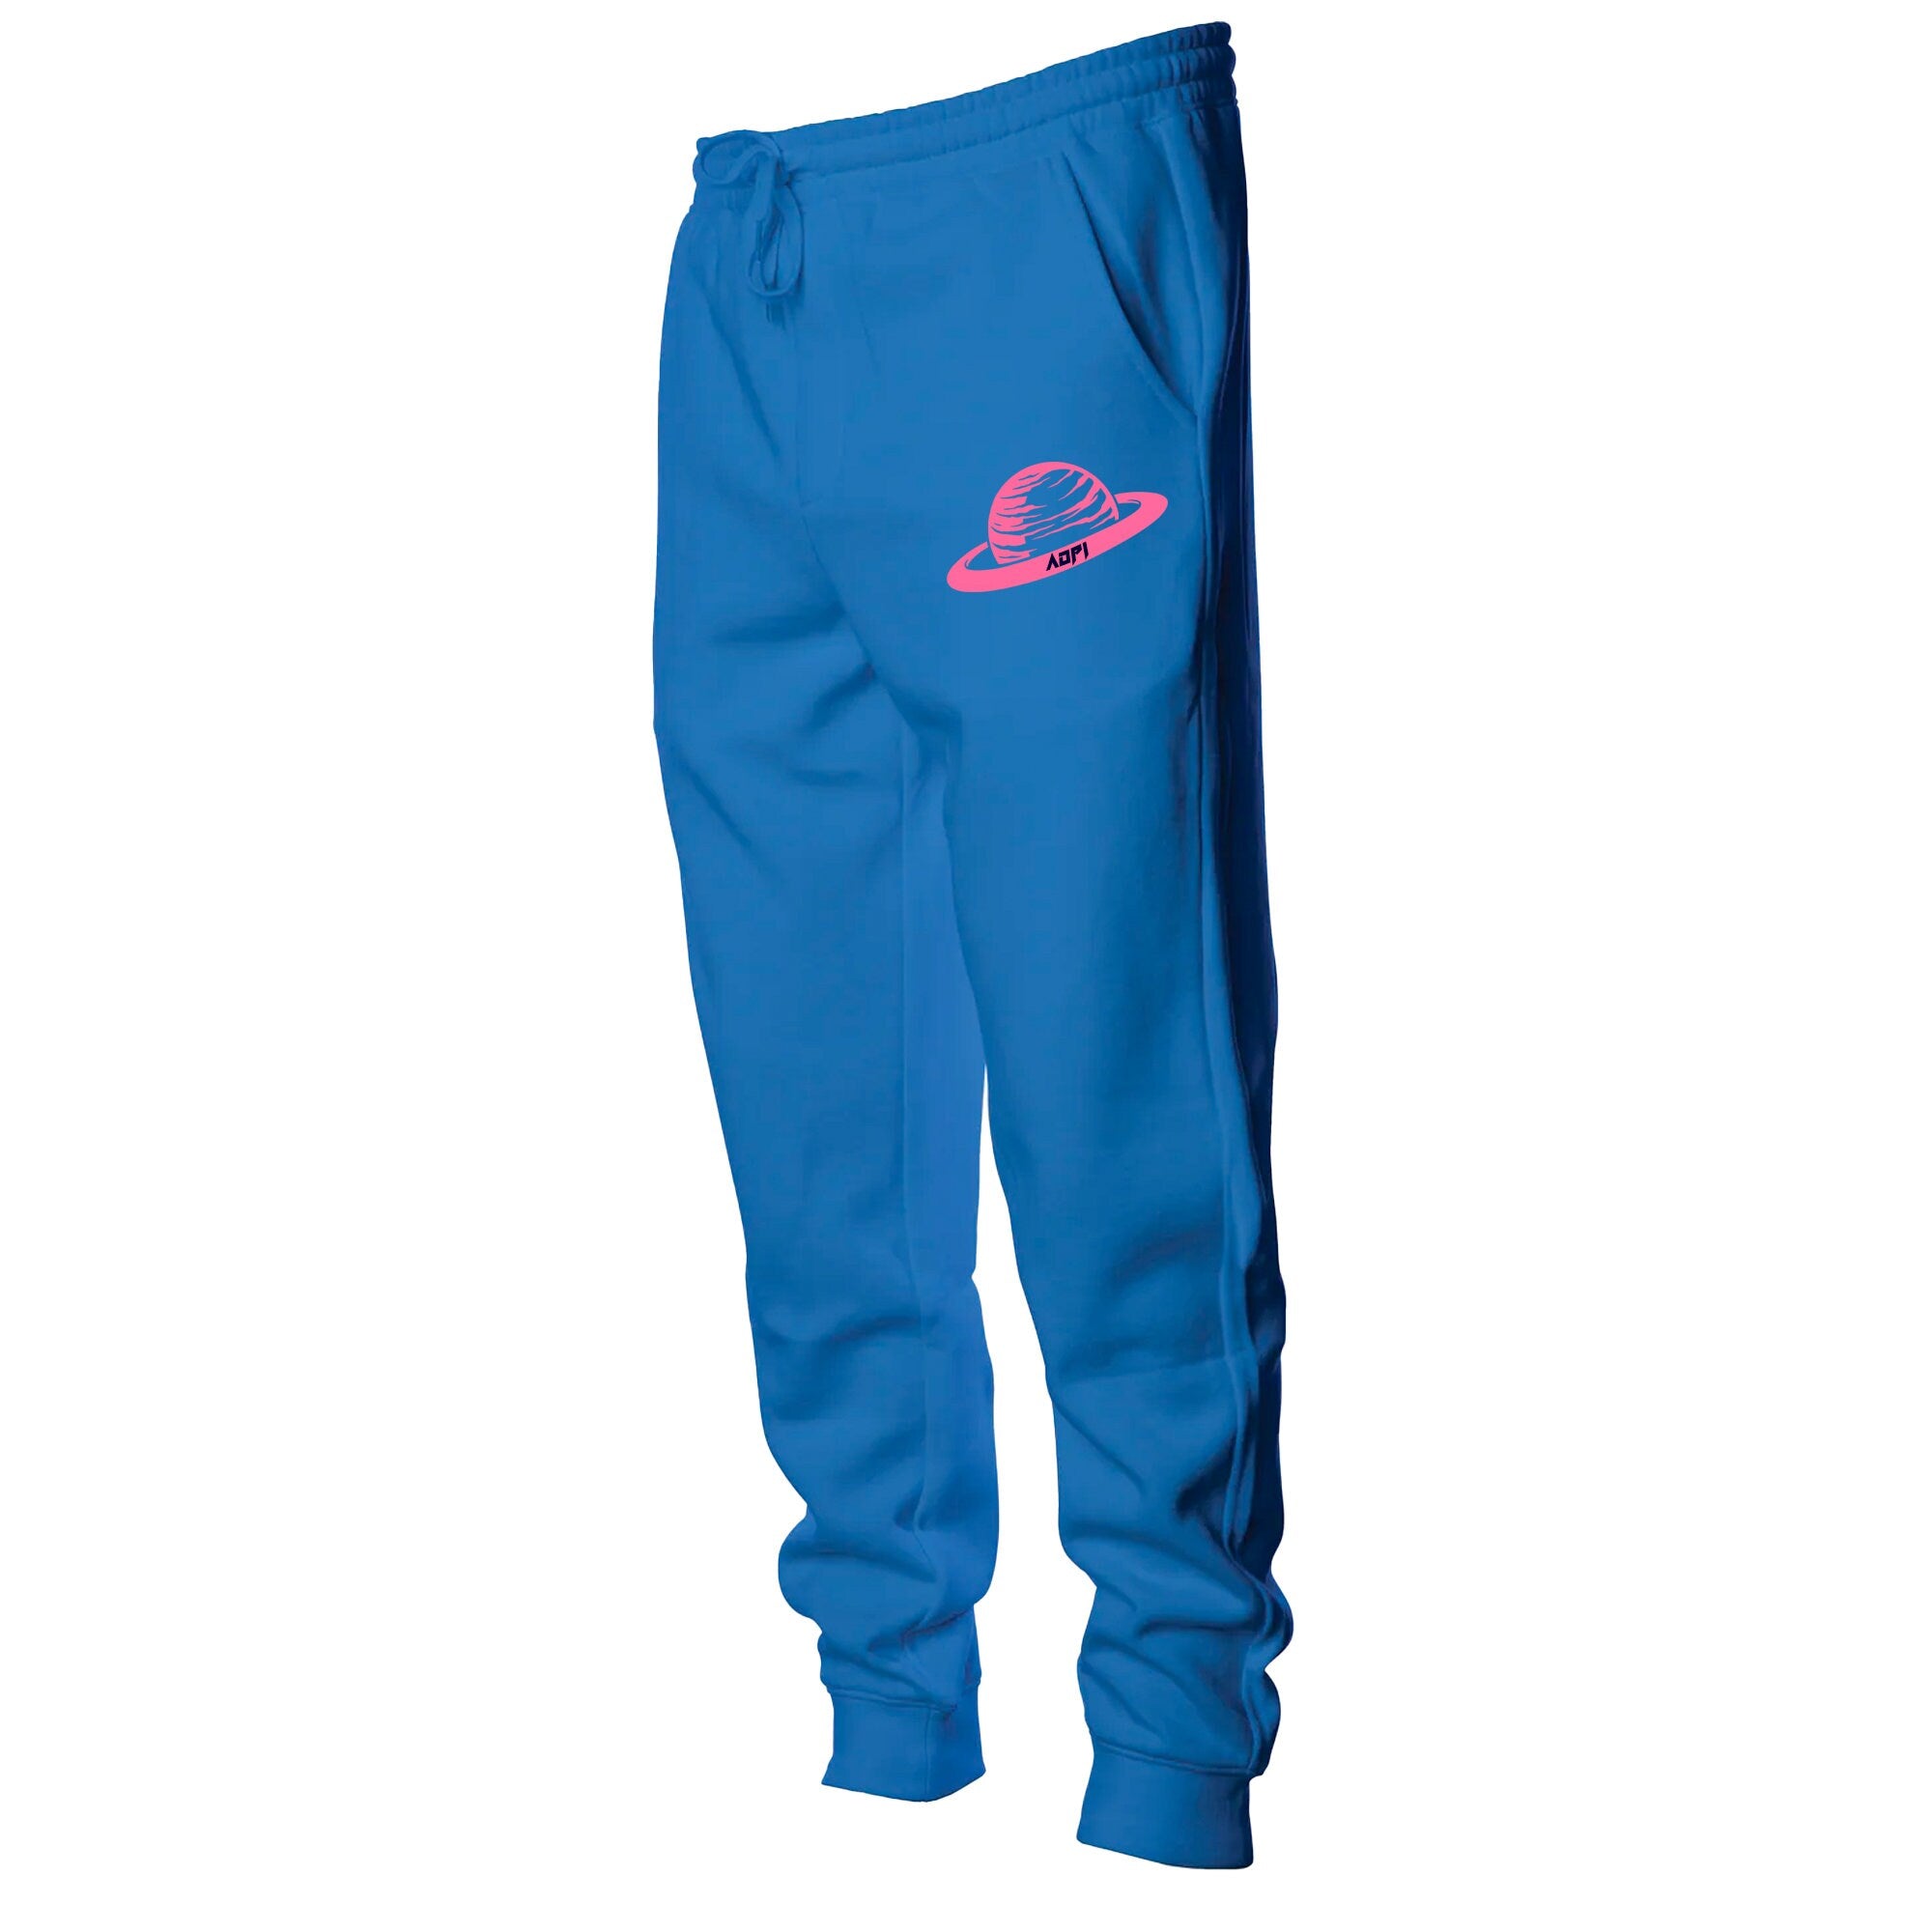 ADPi is out of this World Sweatsuit Set - Matching Blue Hoodie & Sweatpants Set, Jogger Set - Go Greek Chic